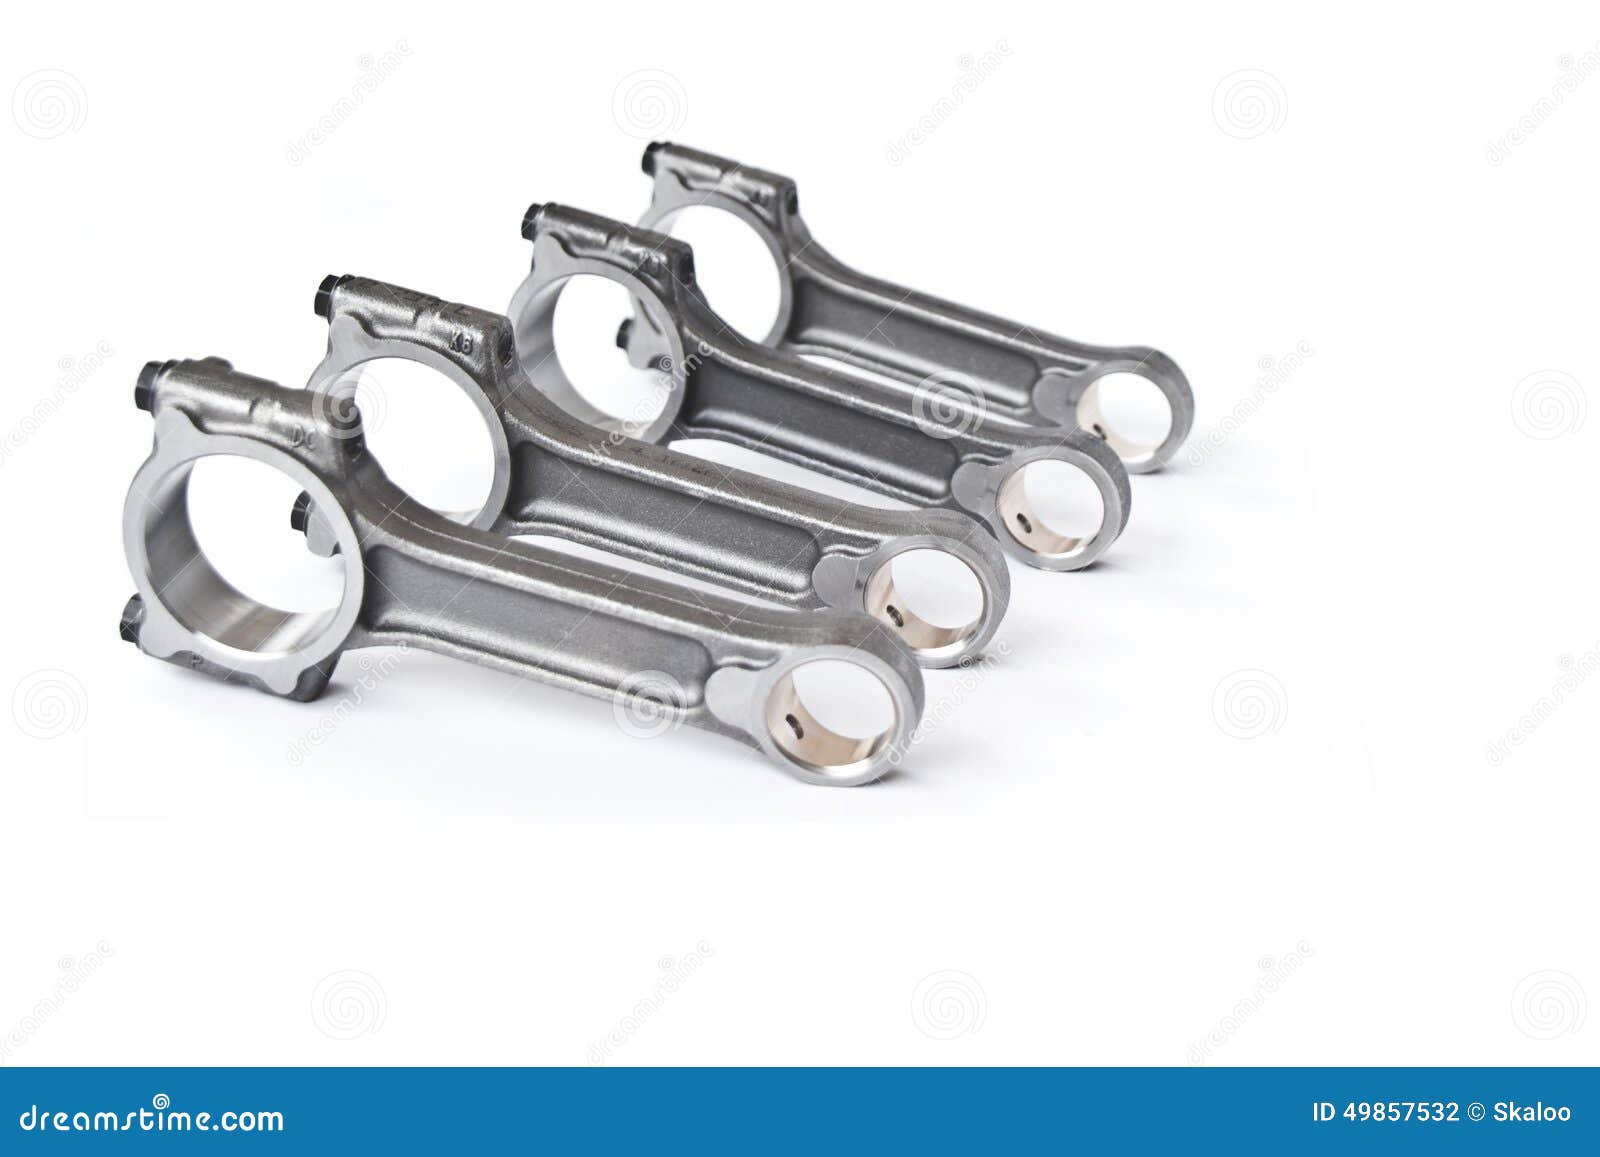 automotive connecting rods